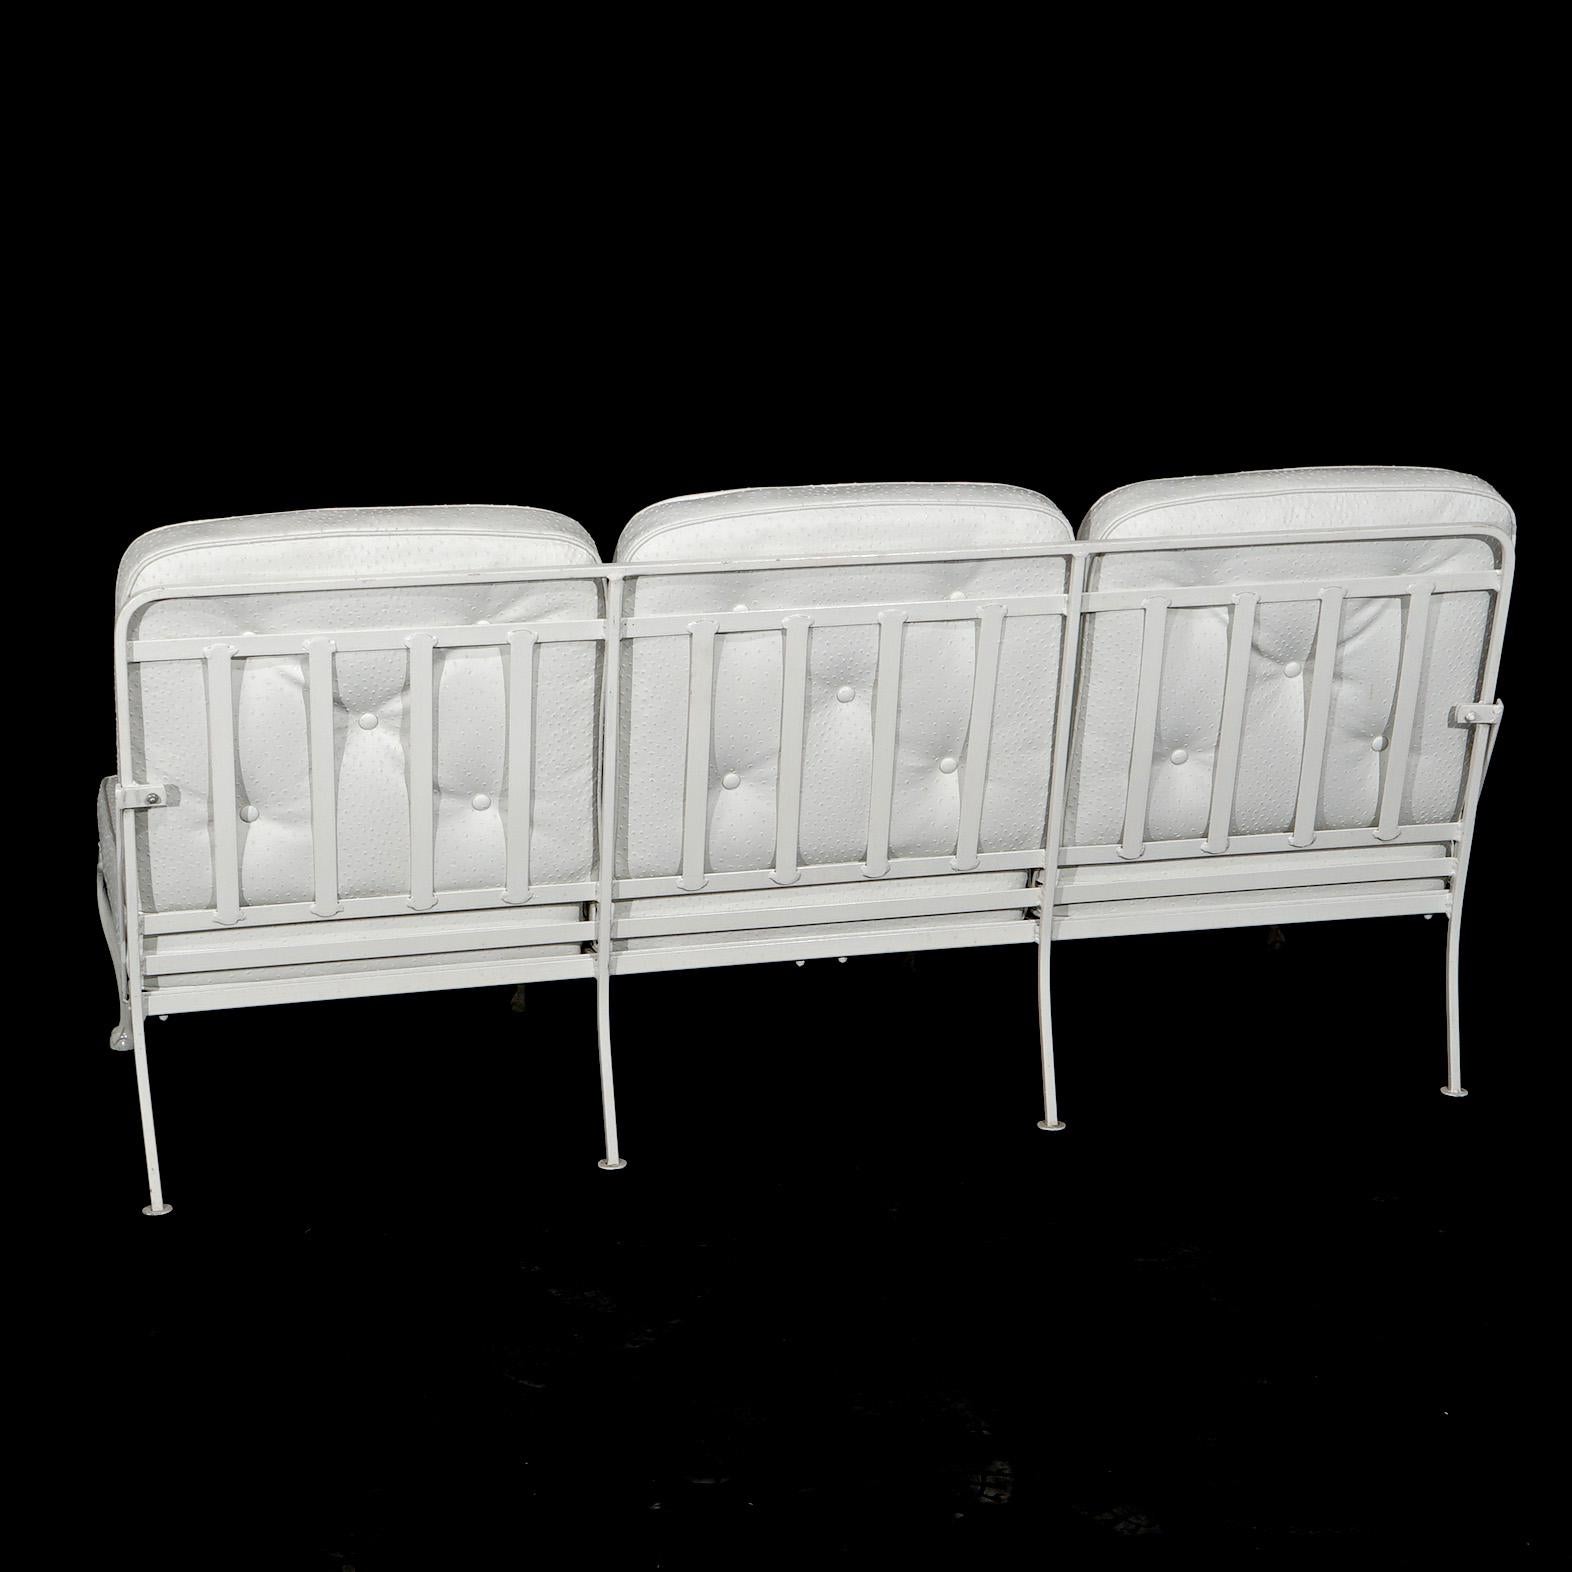 Painted & Scrolled Wrought Iron Sofa, Two Chairs & Two Ottomans 20th C For Sale 5